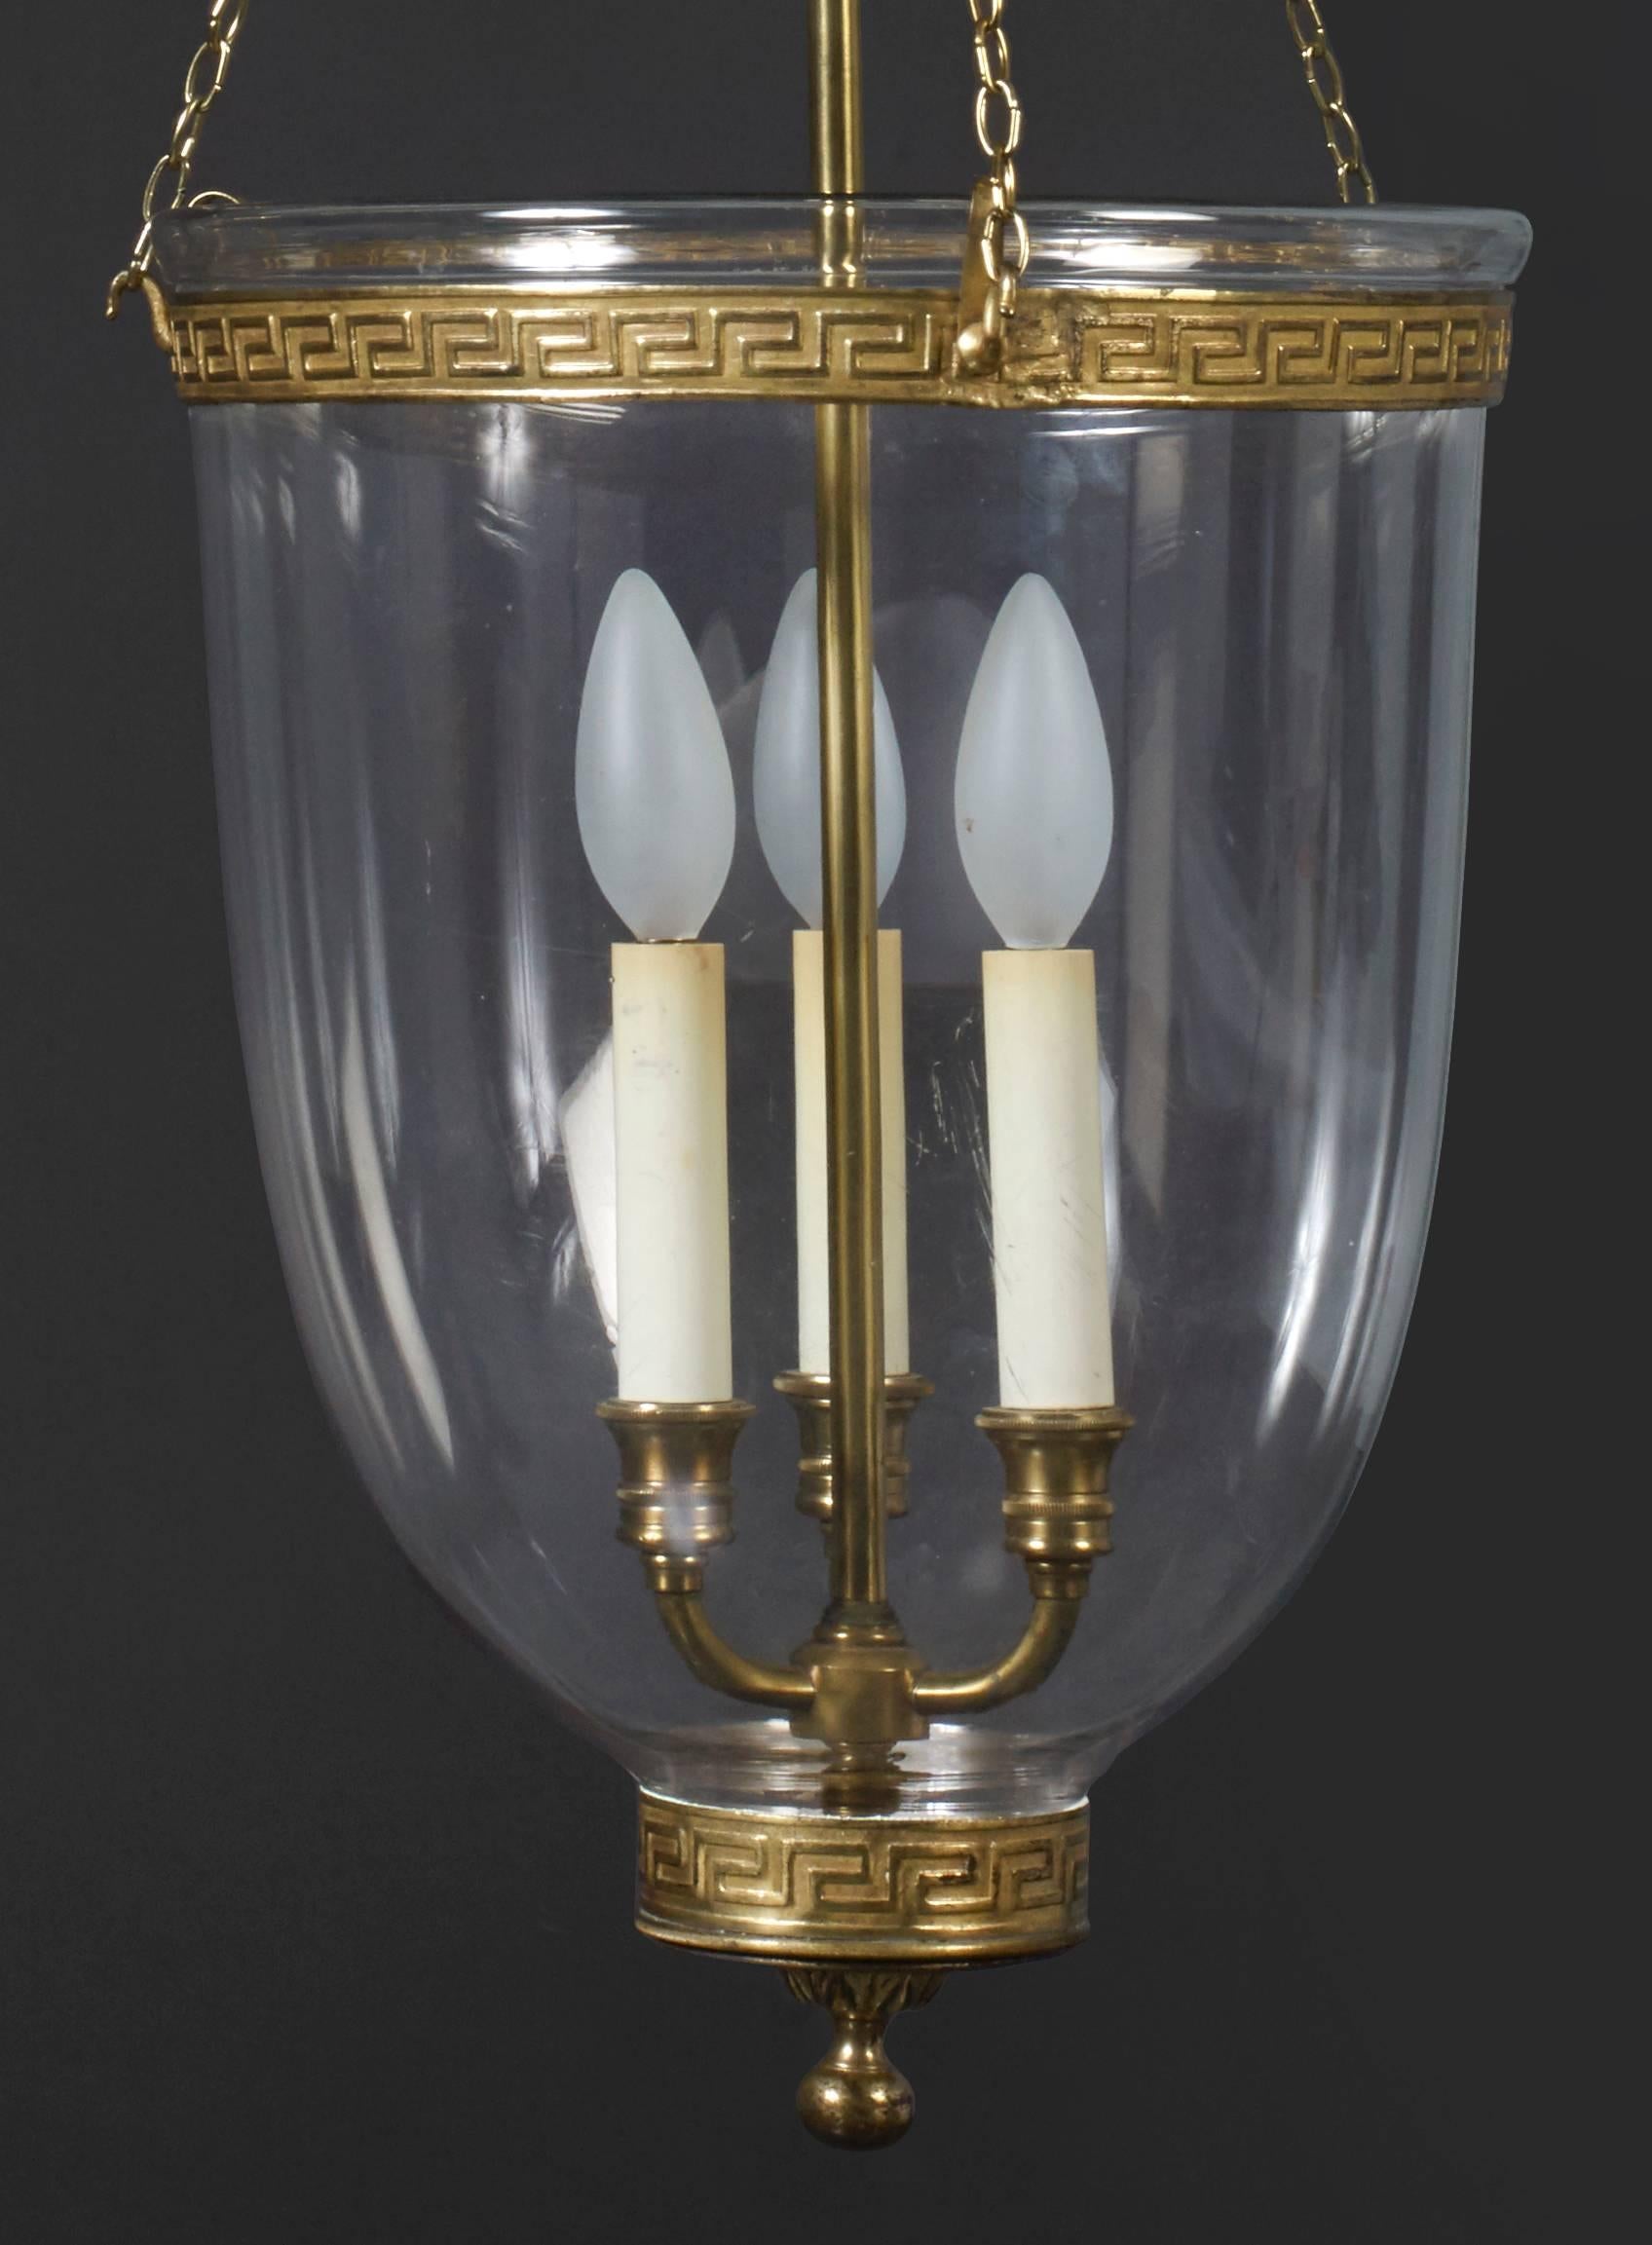 An early 19th century pendant glass hanging lantern, having a smoke cowl and suspended from a gilt lead counterweight eagle. The lantern has a candle socle at the base and a collar around the rim each enriched with low relief gilt Vitruvian scroll.